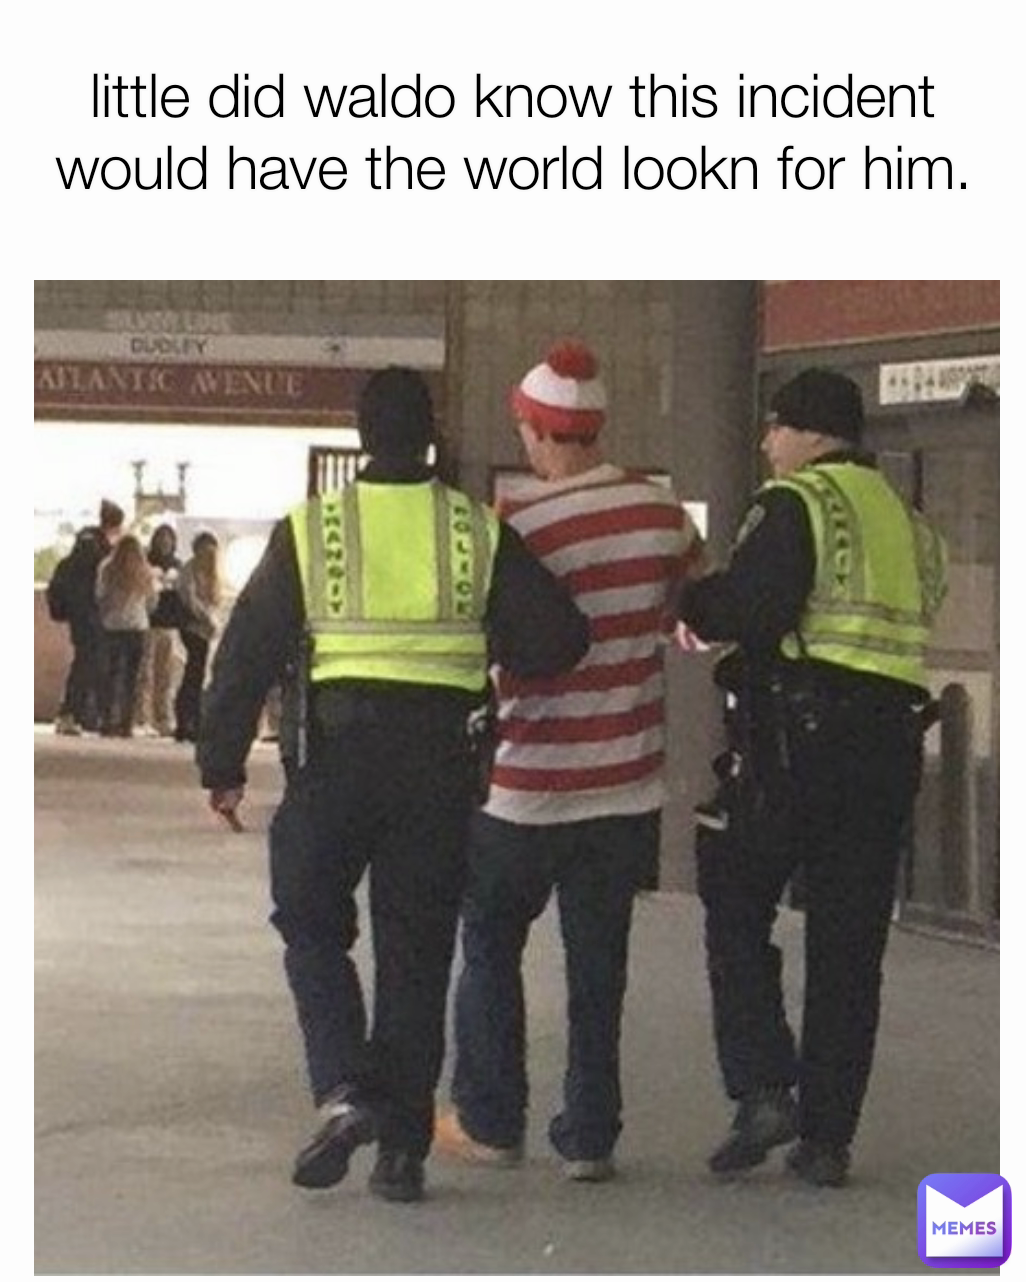 little did waldo know this incident would have the world lookn for him.